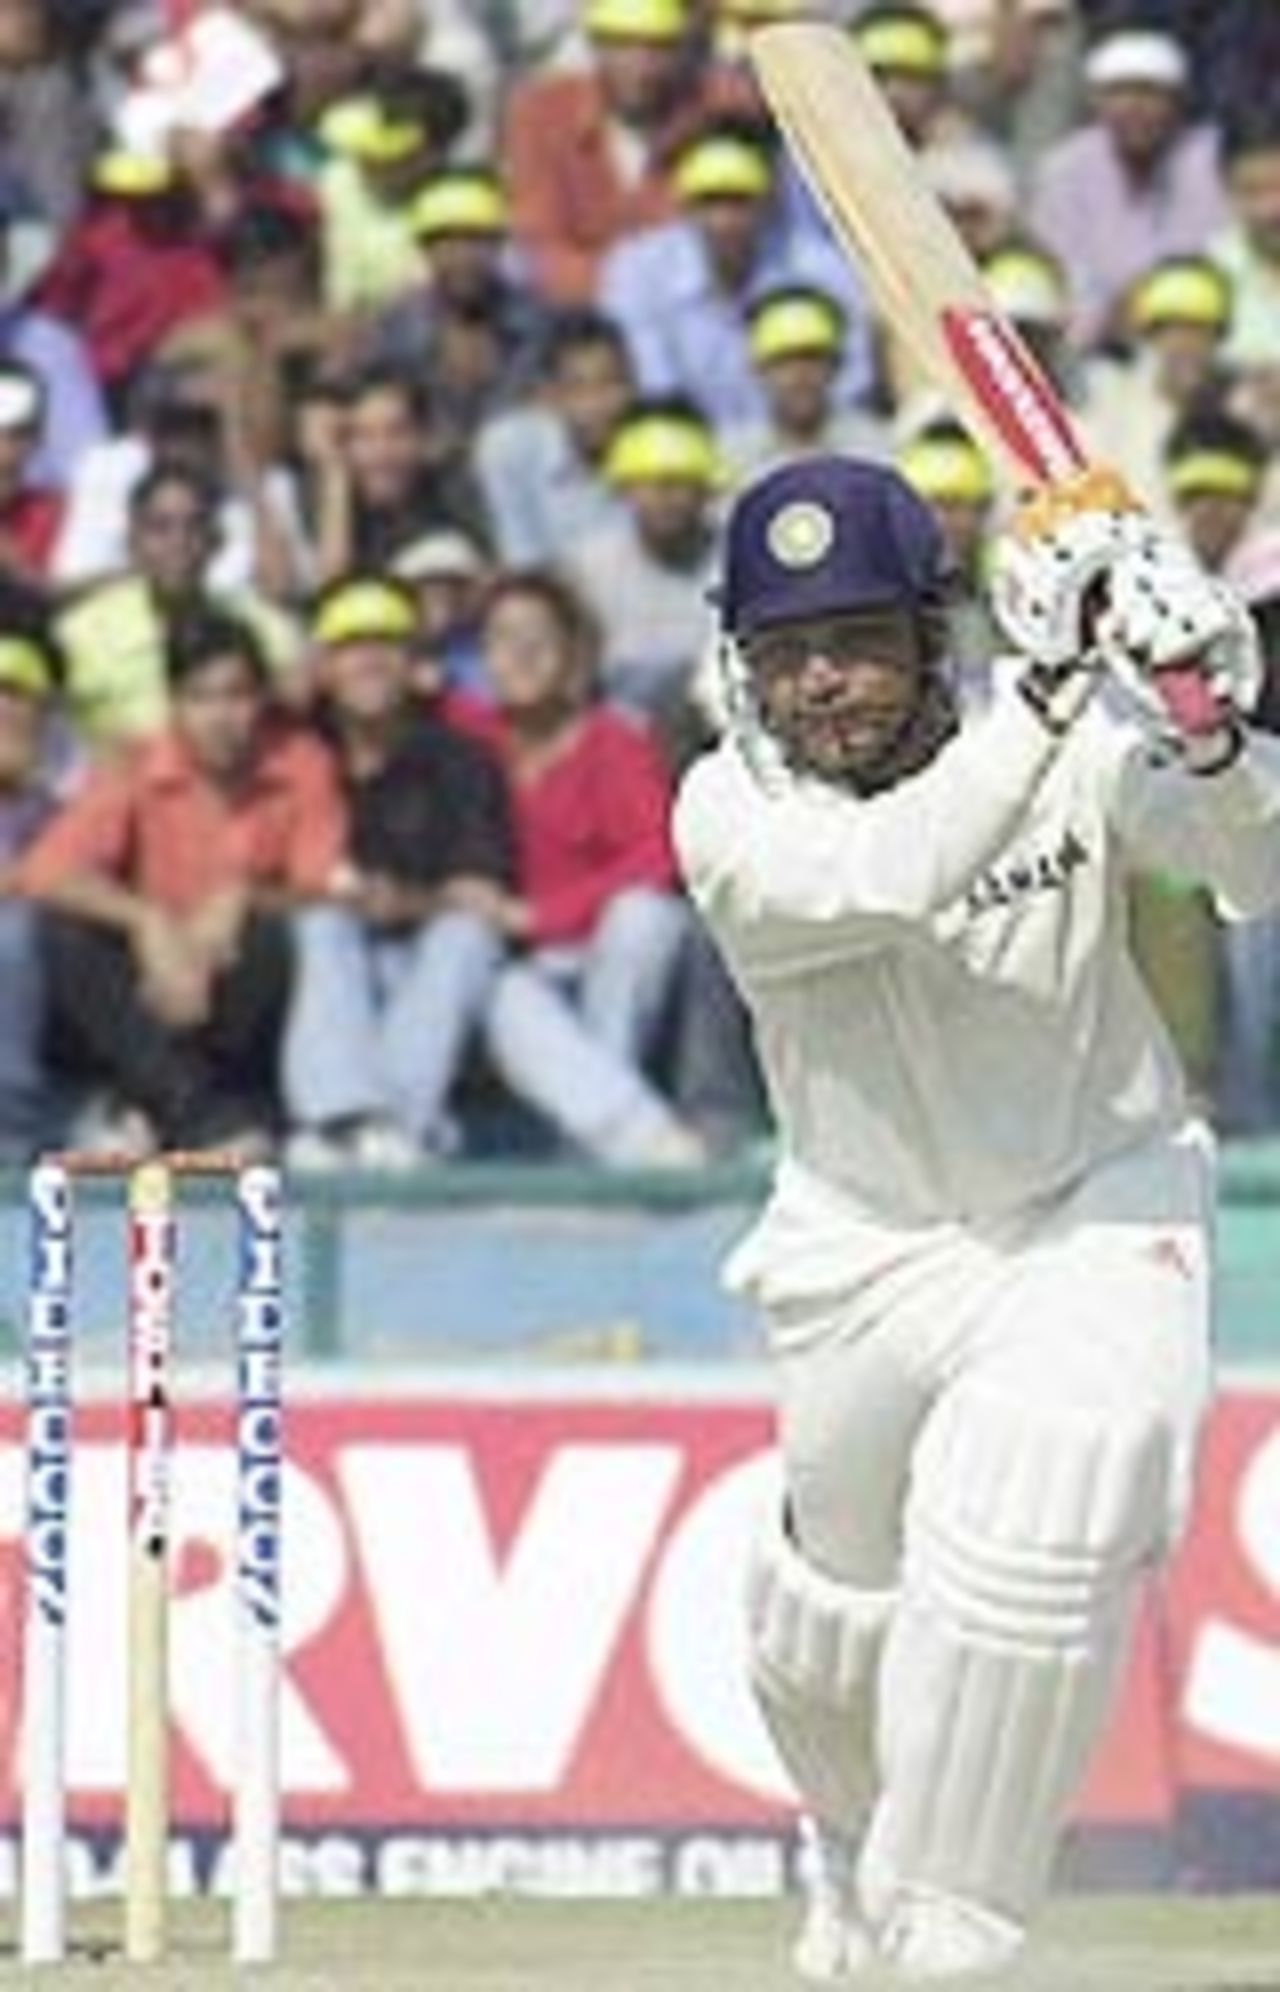 Virender Sehwag plays a sparkling cover-drive on his way to a century, India v New Zealand, 2nd Test, Mohali, October 18